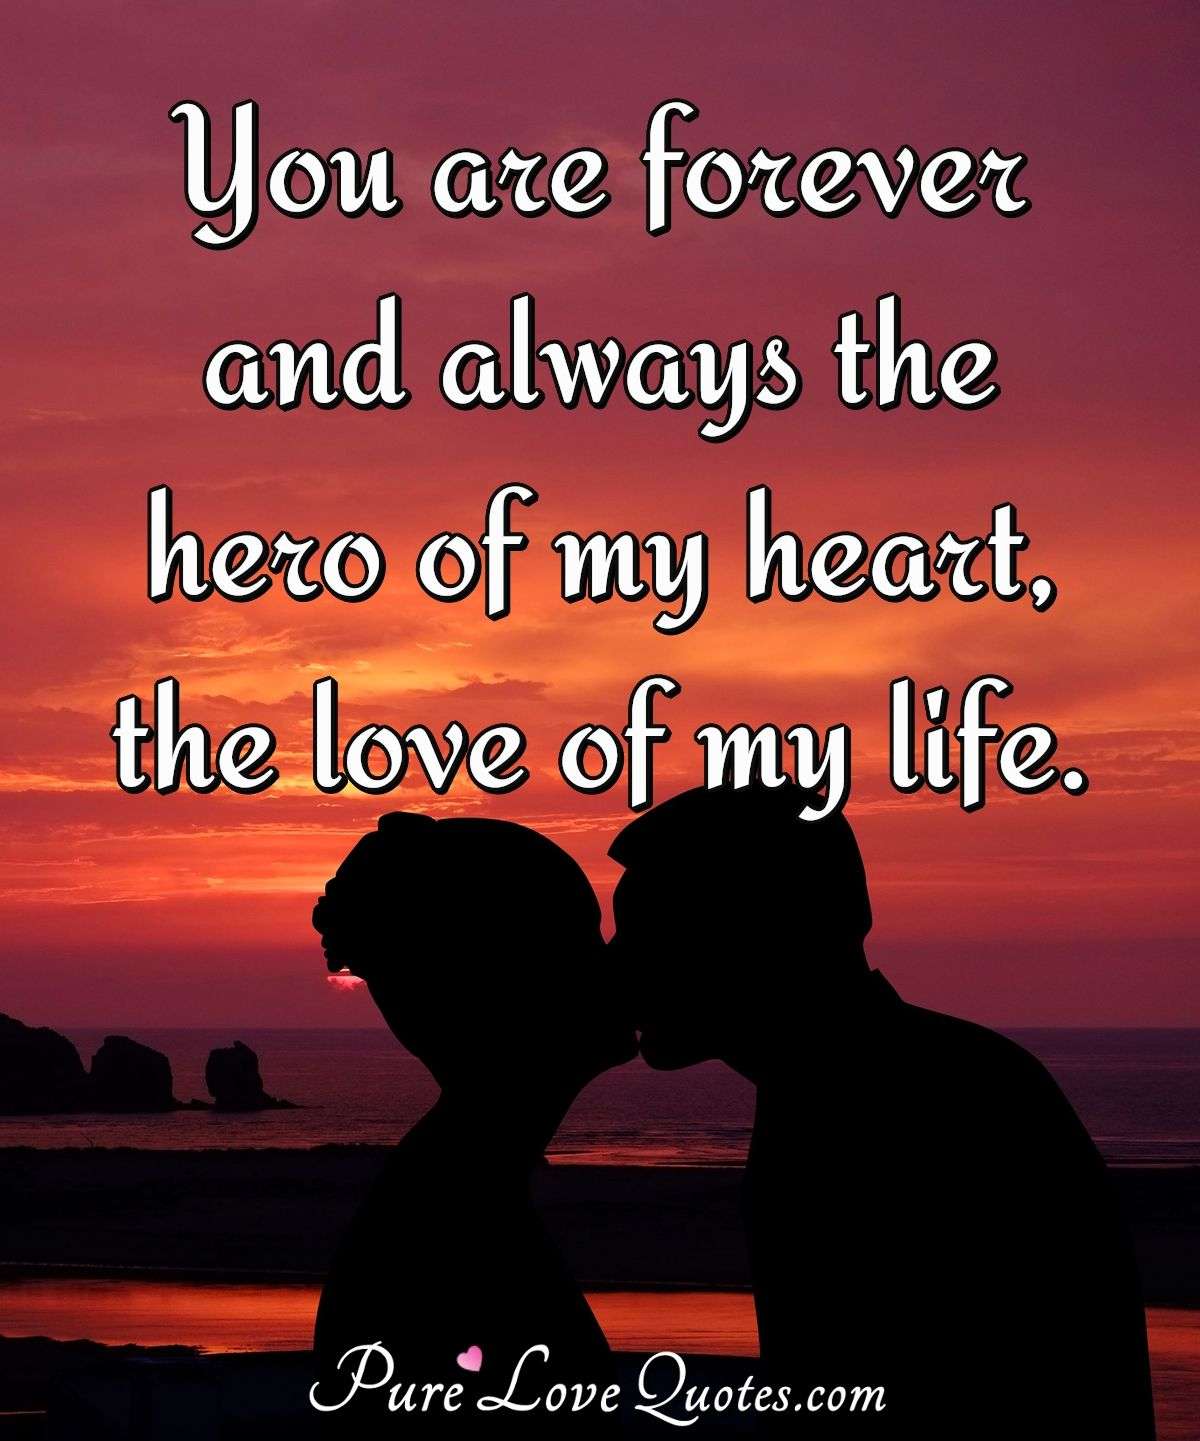 Best Love You Forever Images And Quotes For